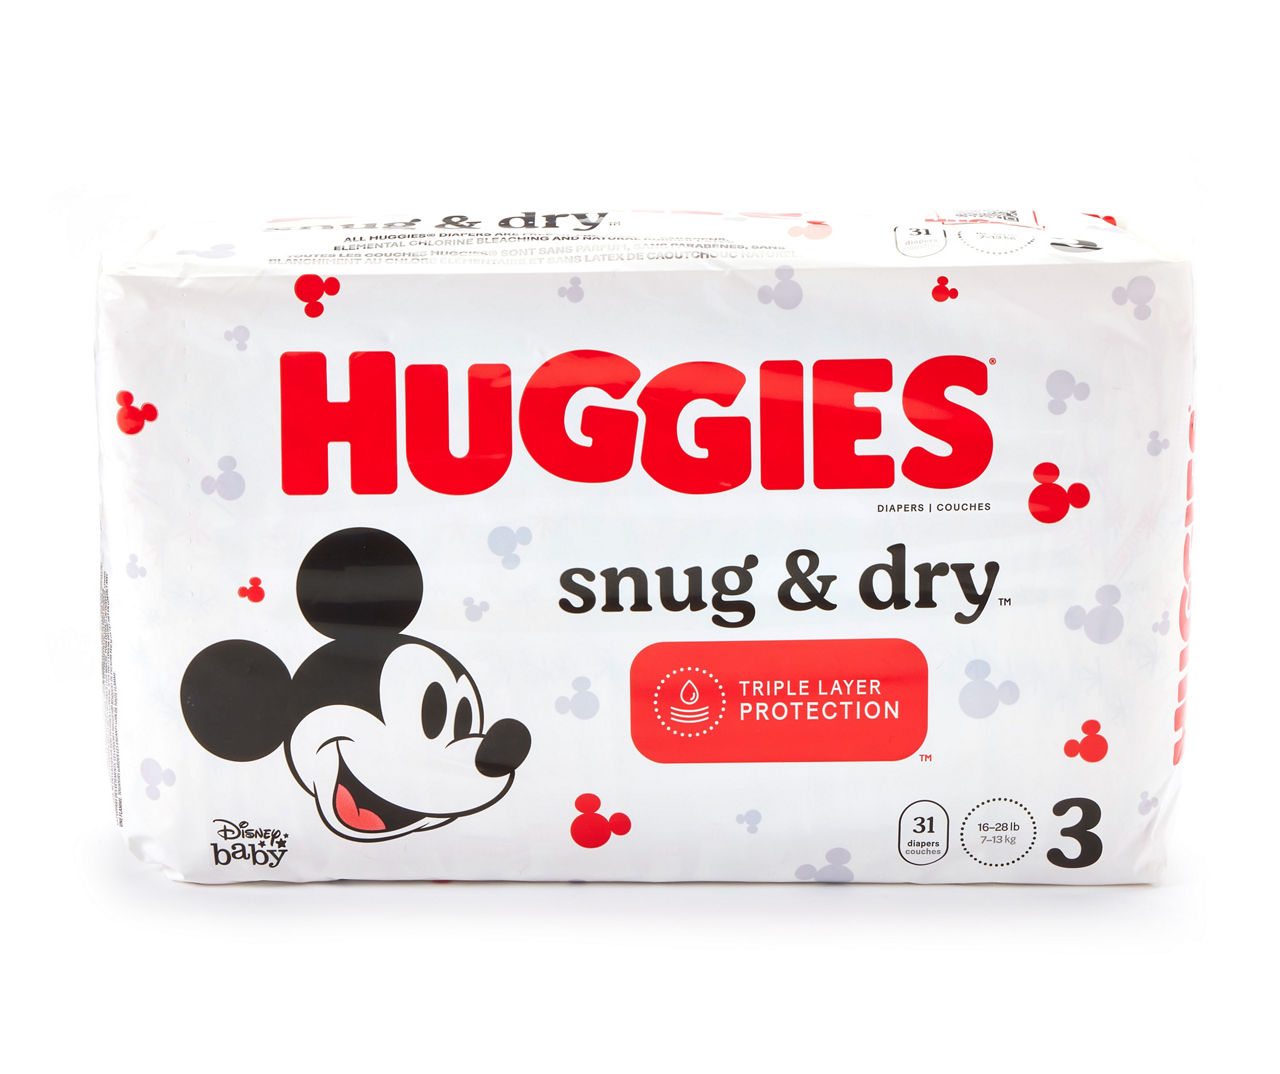  Huggies Size 5 Diapers, Snug & Dry Baby Diapers, Size